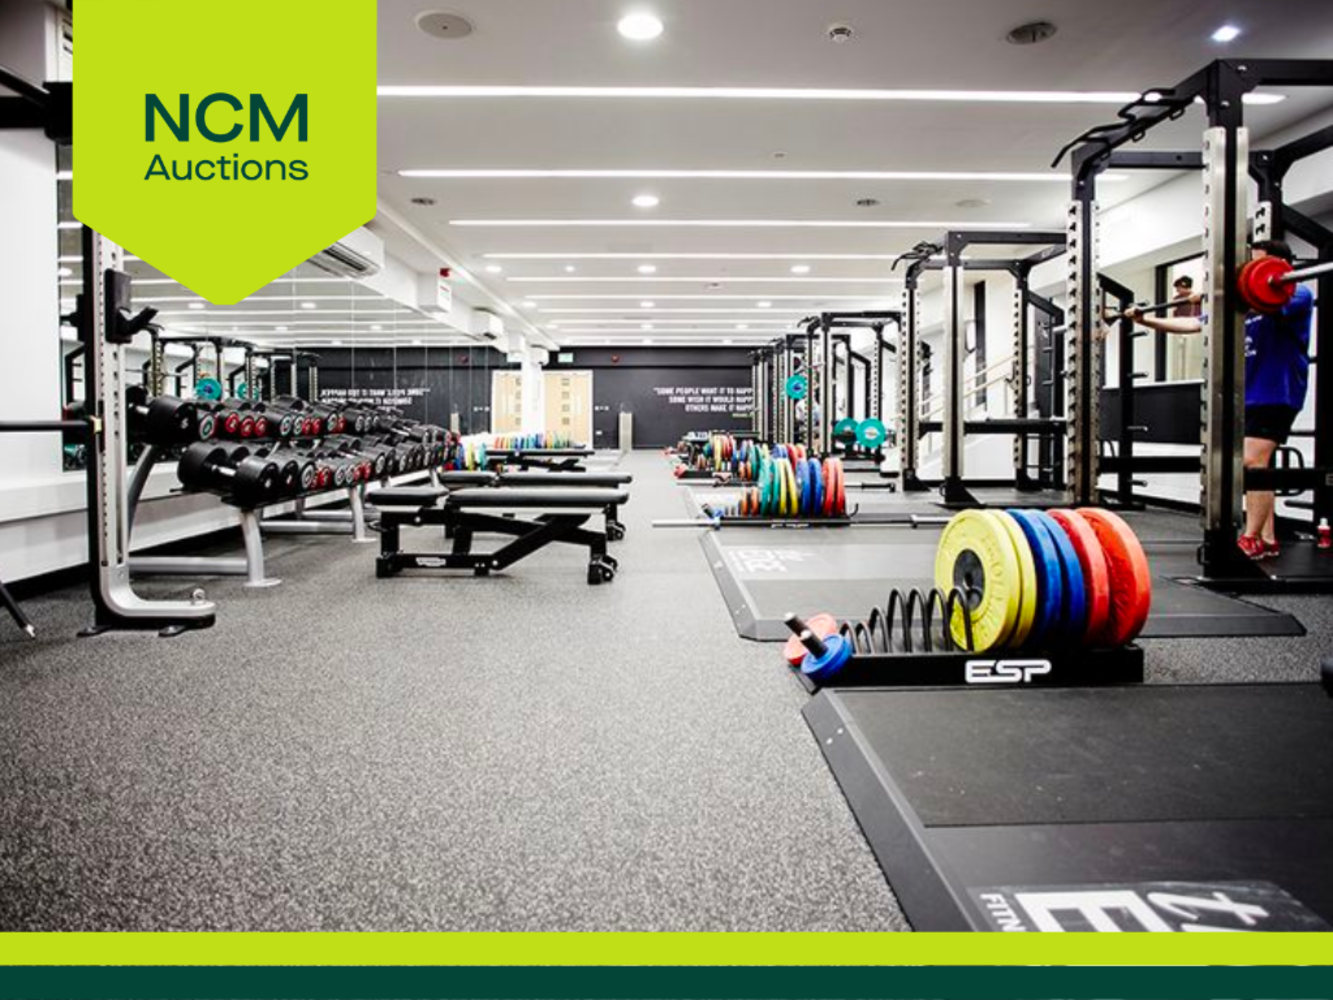 Direct from University Of Leeds & Premium Gym - Entire Contents of Gym to include - Power Racks, Massage Beds, Dumbbells, Leg Extension & More